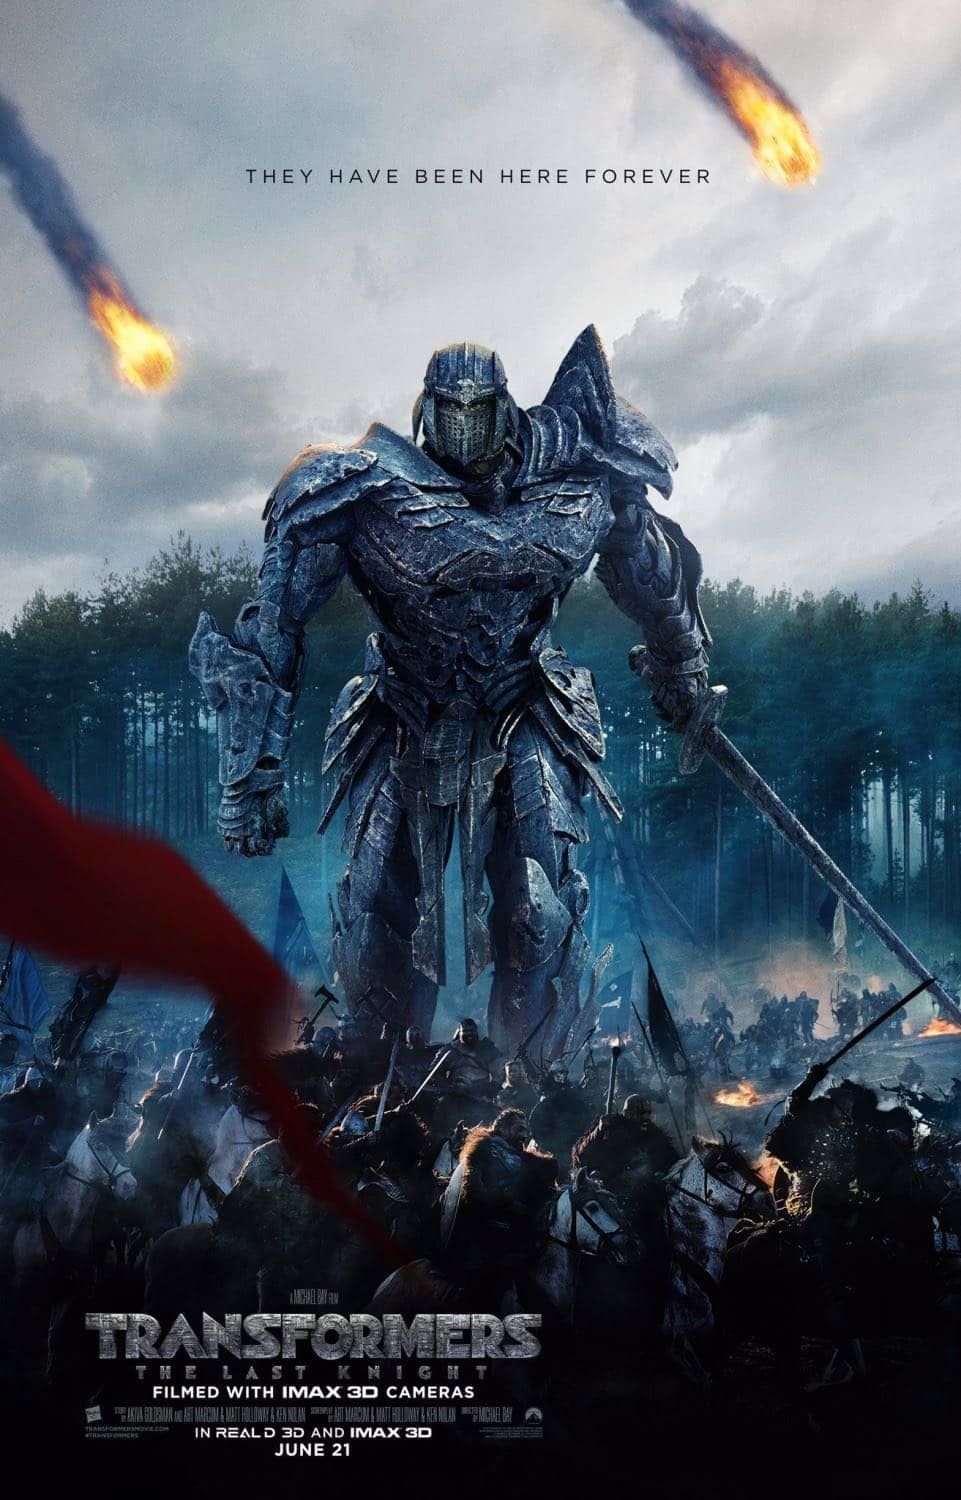 Transformers: The Last Knight Goes Medieval In New Poster